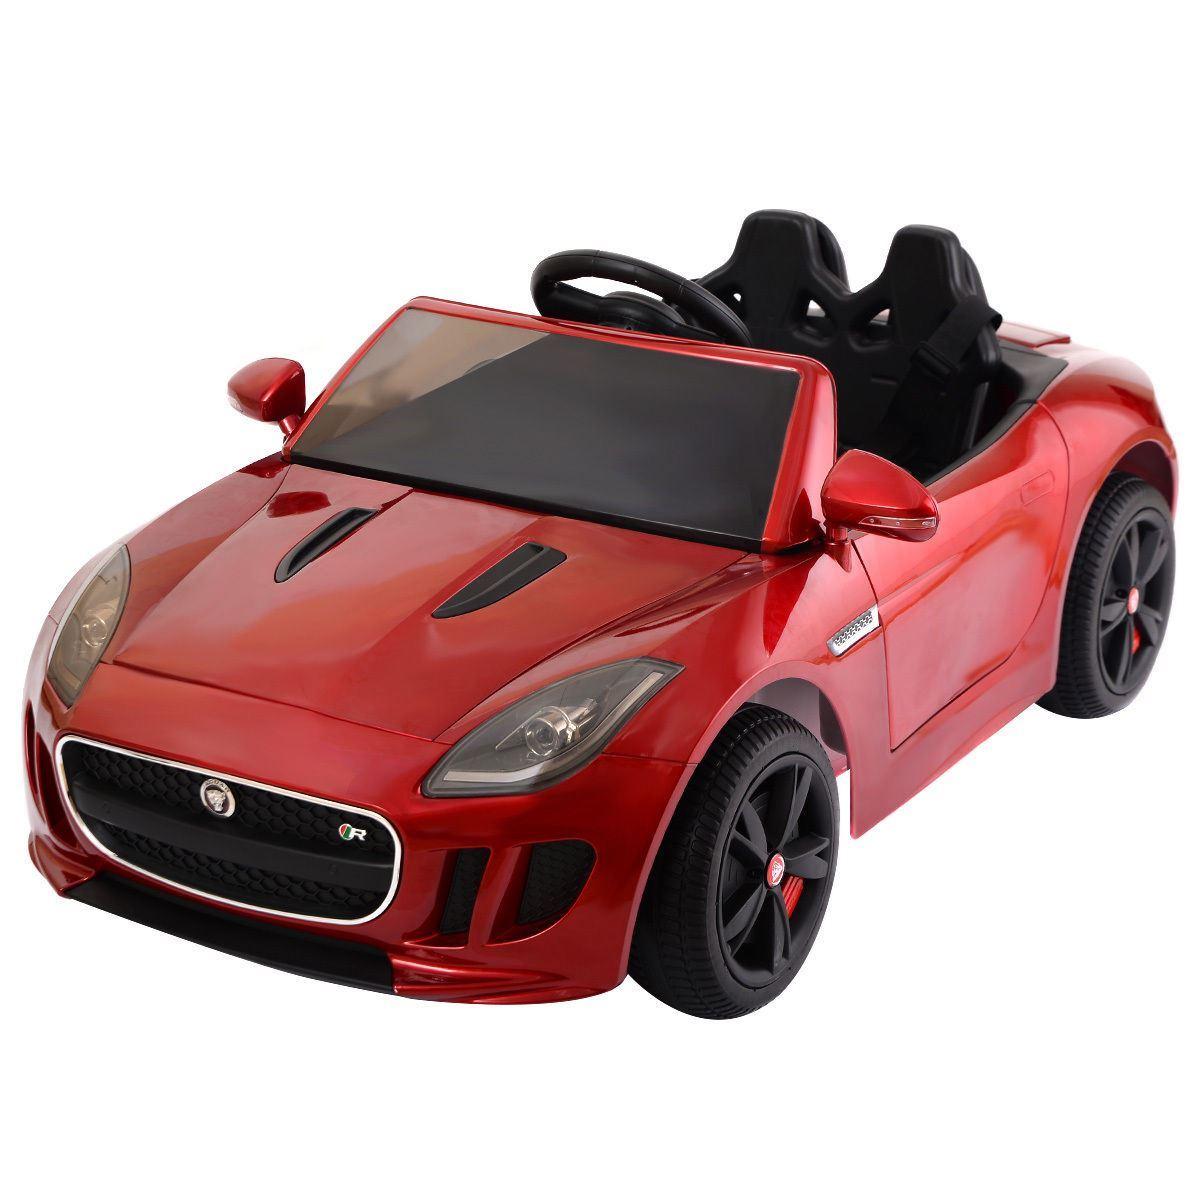 Online Gym Shop Cb16979 Kids Baby Ride On Toy Car Jaguar F-type 12v Battery Power Licensed Mp3 With Remote Control